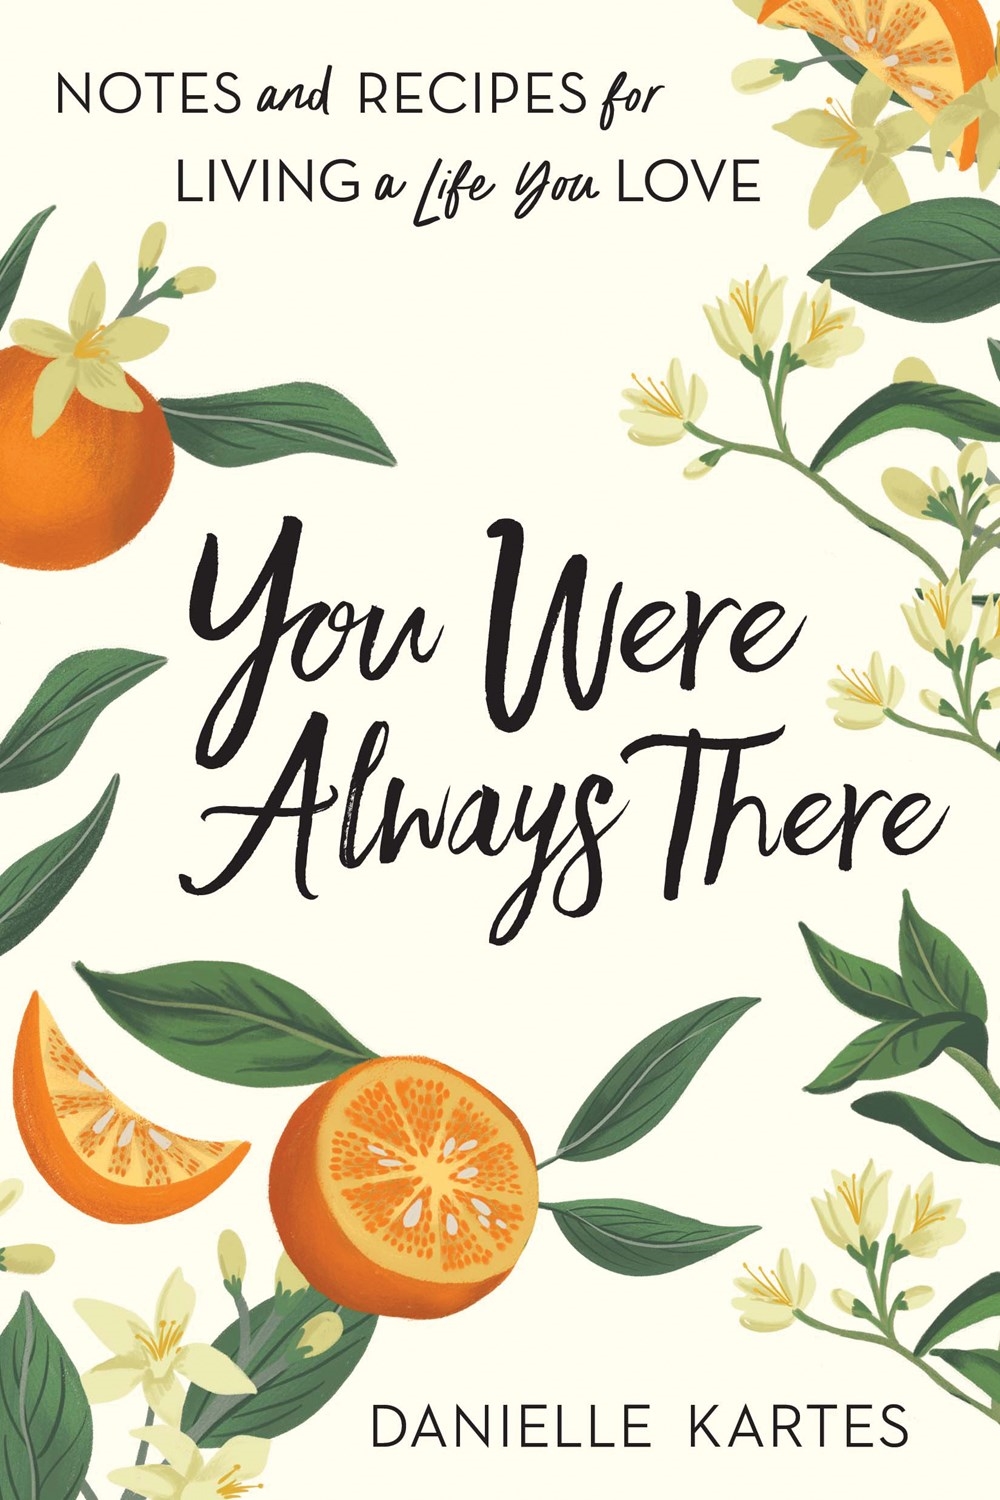 You Were Always There by Danielle Kartes - Penguin Books Australia